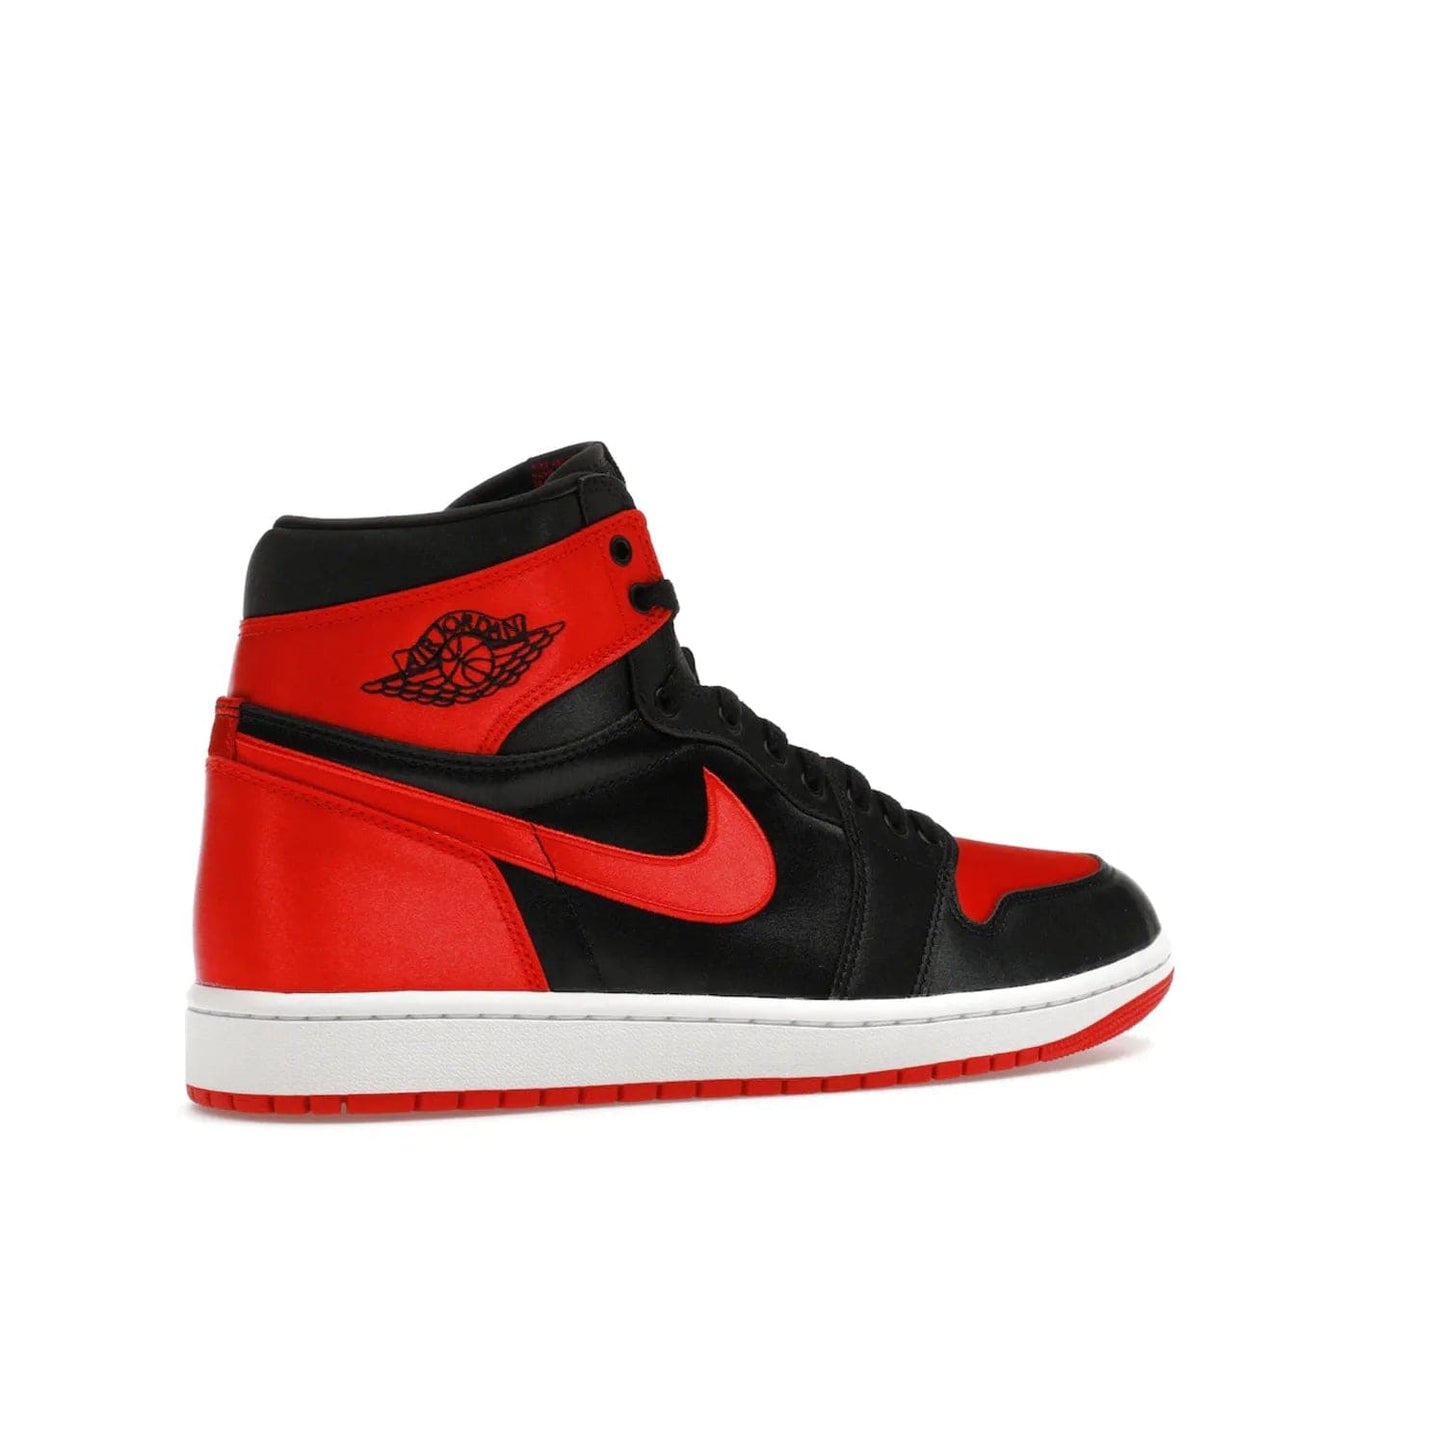 Jordan 1 Retro High OG Satin Bred (Women's) - Image 34 - Only at www.BallersClubKickz.com - Introducing the Jordan 1 Retro High OG Satin Bred (Women's). Luxe satin finish, contrasting hues & classic accents. Trending sneakers symbolizing timelessness & heritage. Make a bold statement with this iconic shoe. Available October 4, 2023.